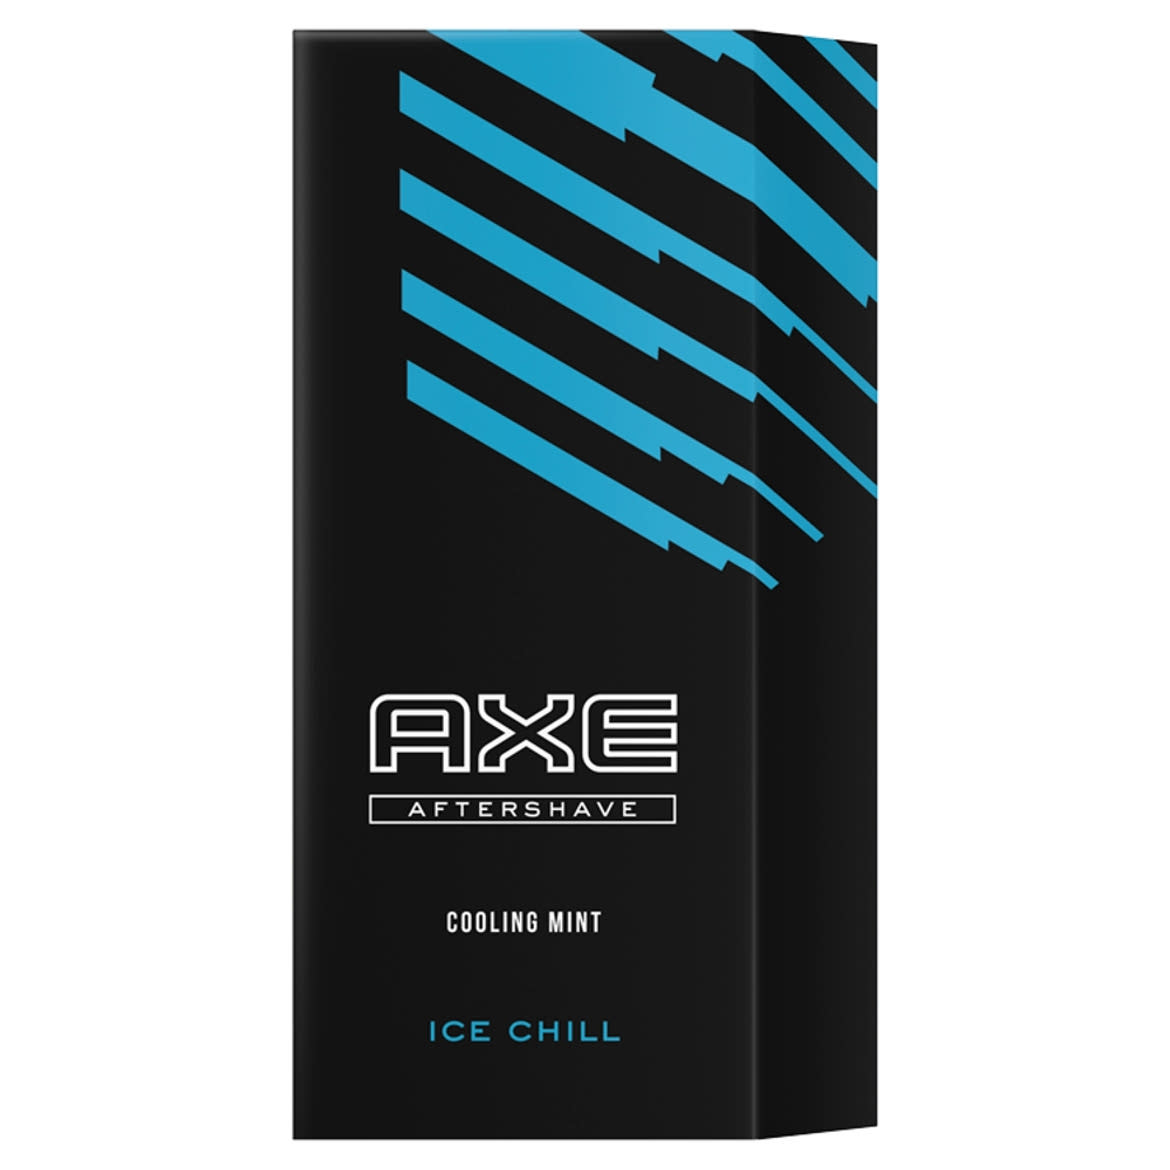 AXE Ice Chill aftershave